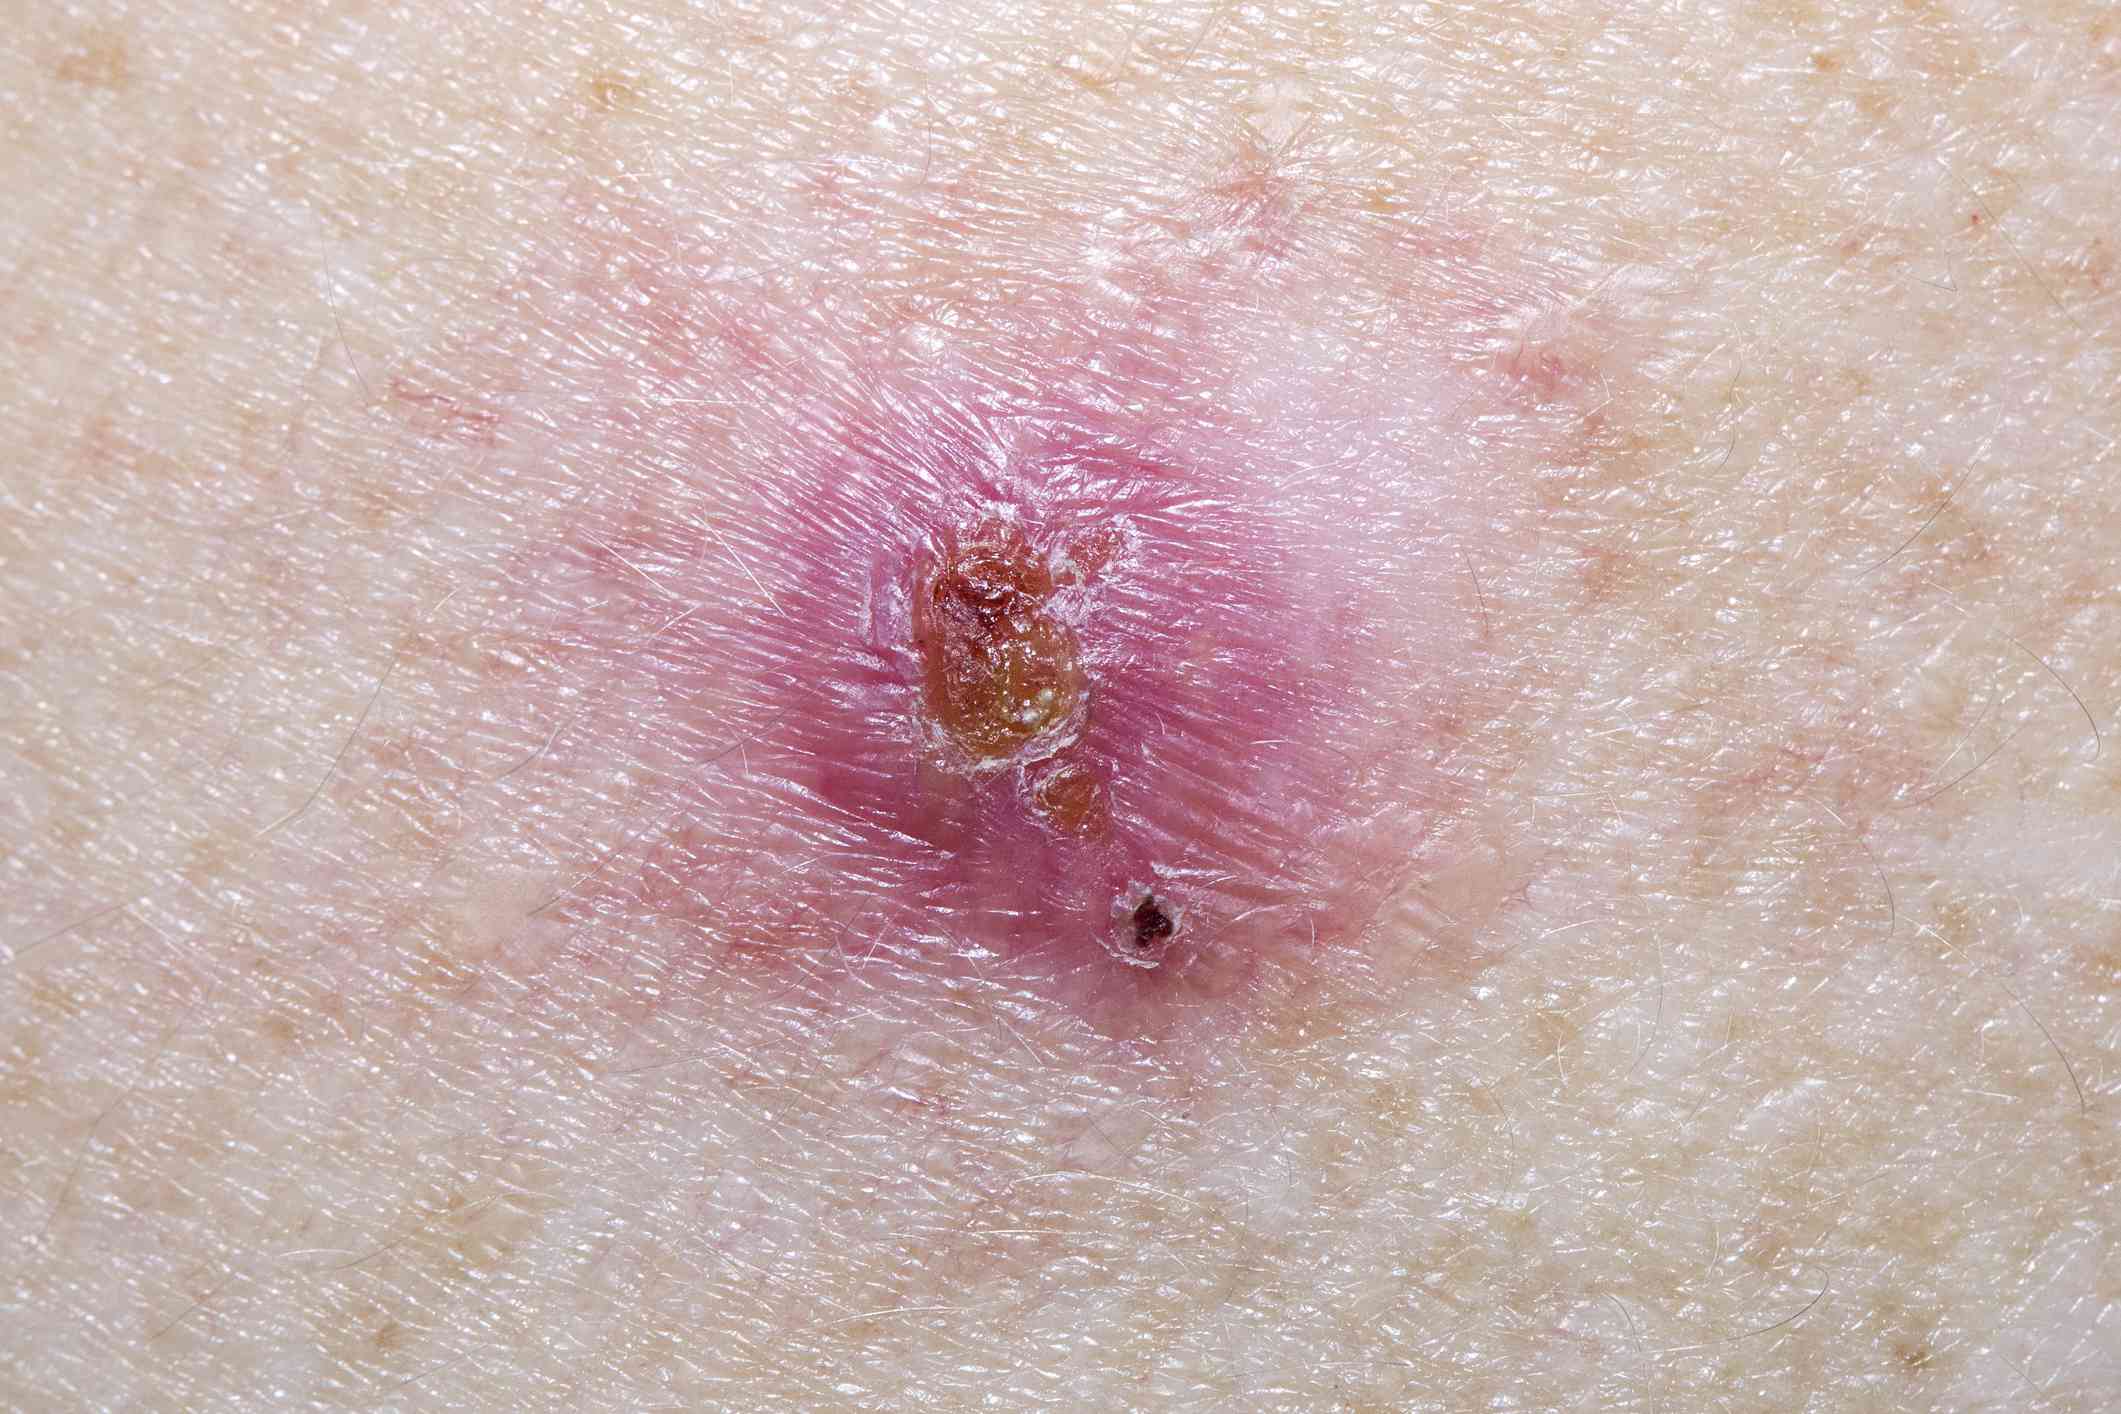 Basal Cell Carcinoma Pictures